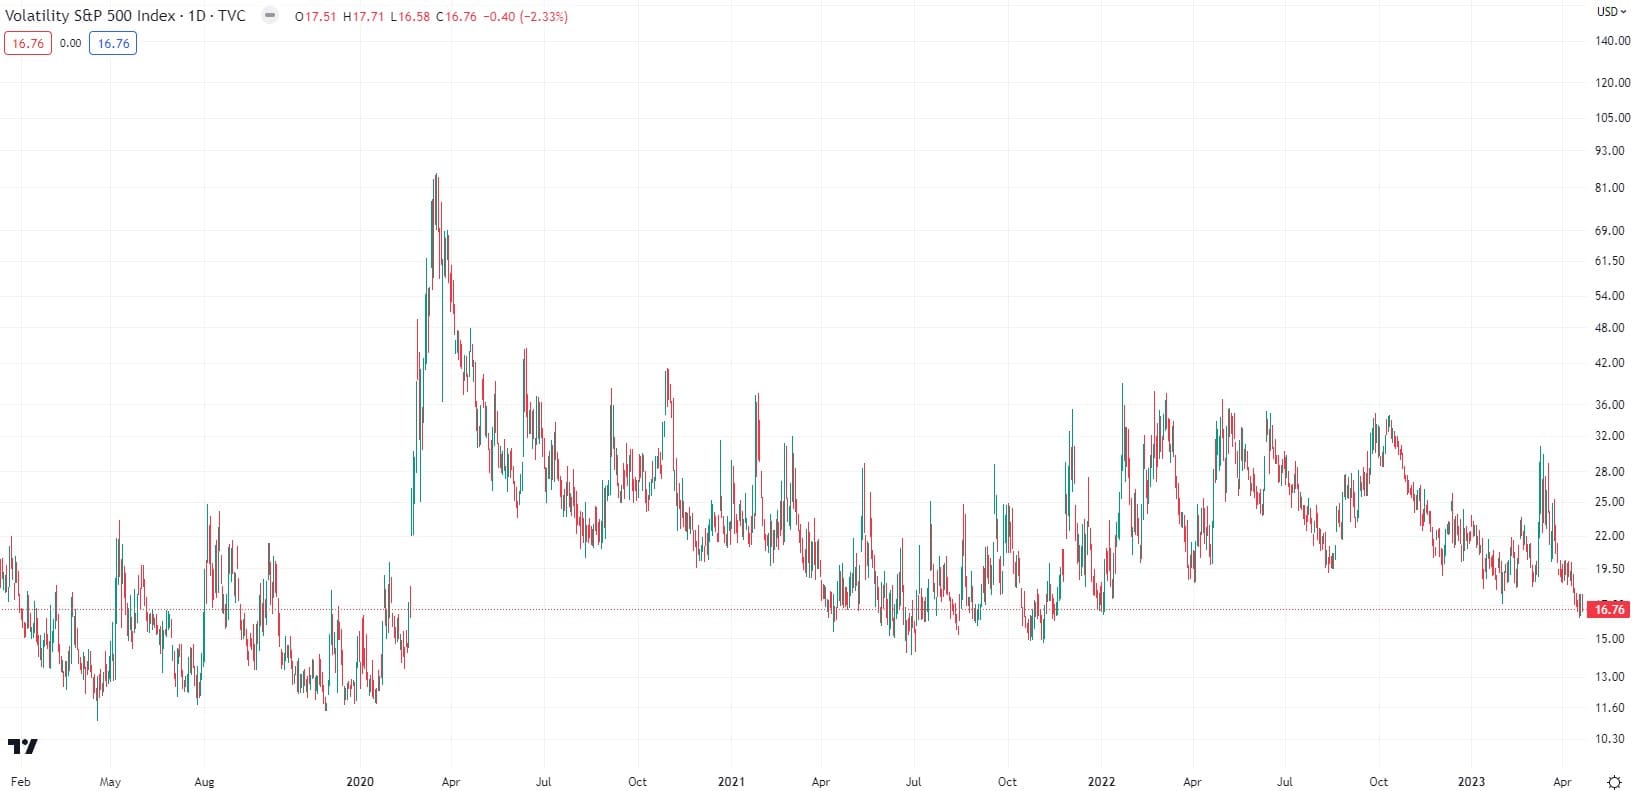 What is the VIX and what are the factors that cause it to violently surge and go into tailspins? 1